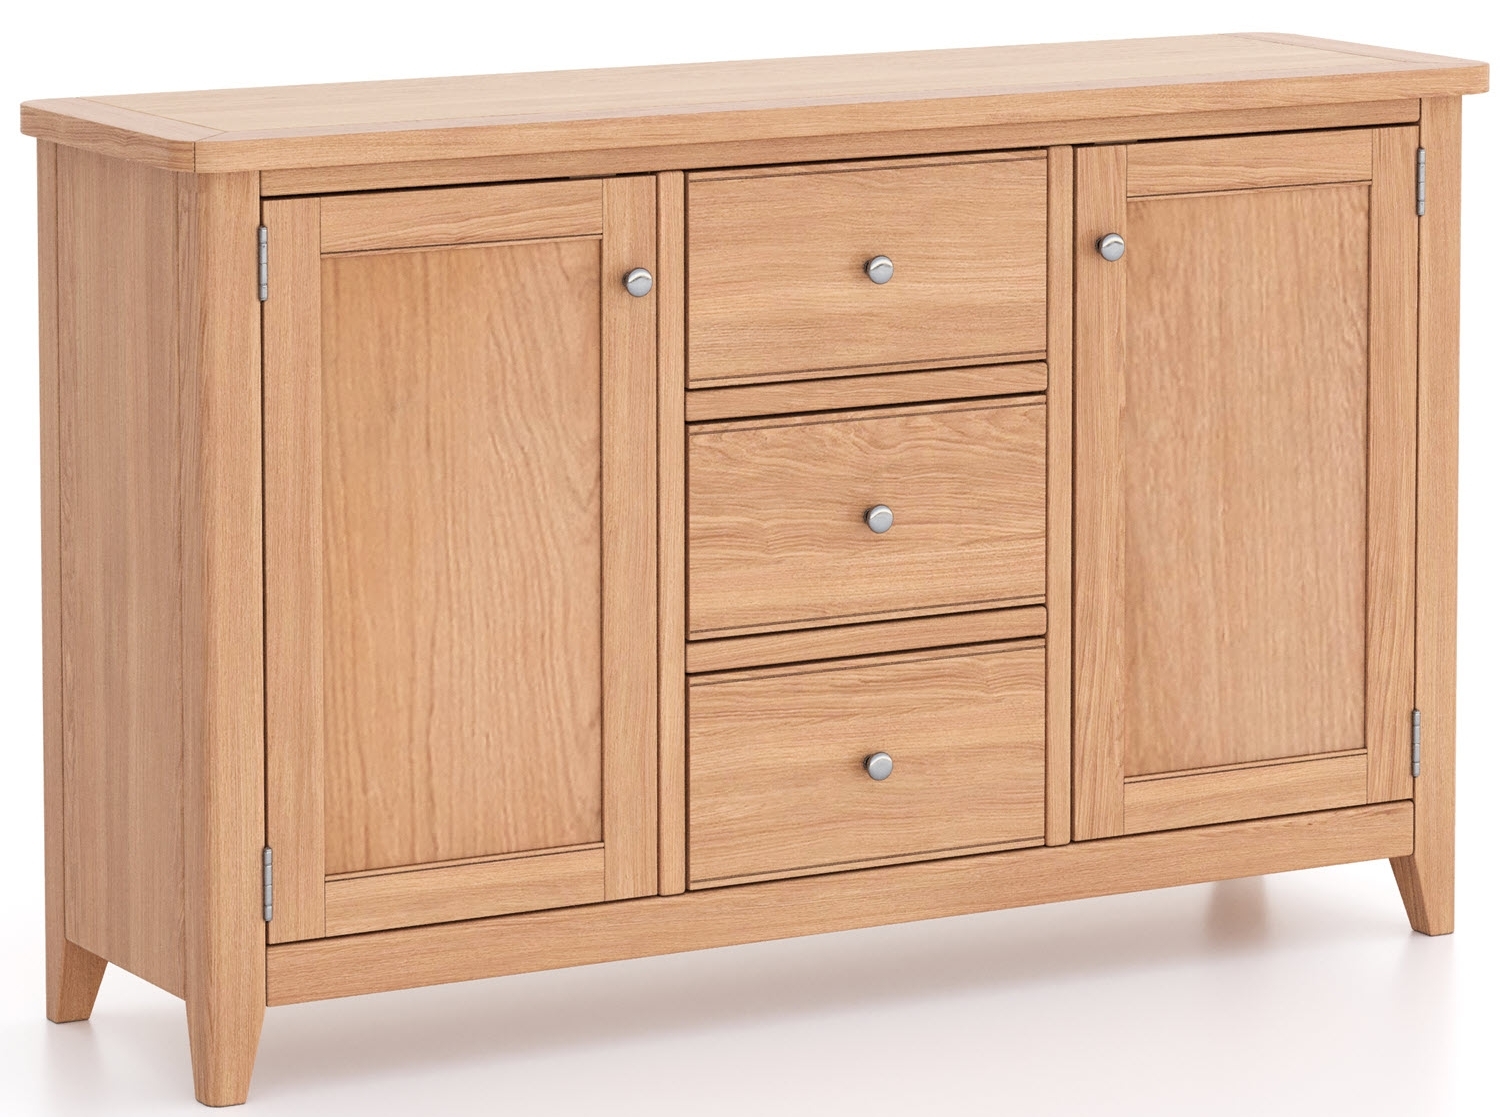 Arden Large Sideboard 115cm With 2 Doors And 3 Drawers